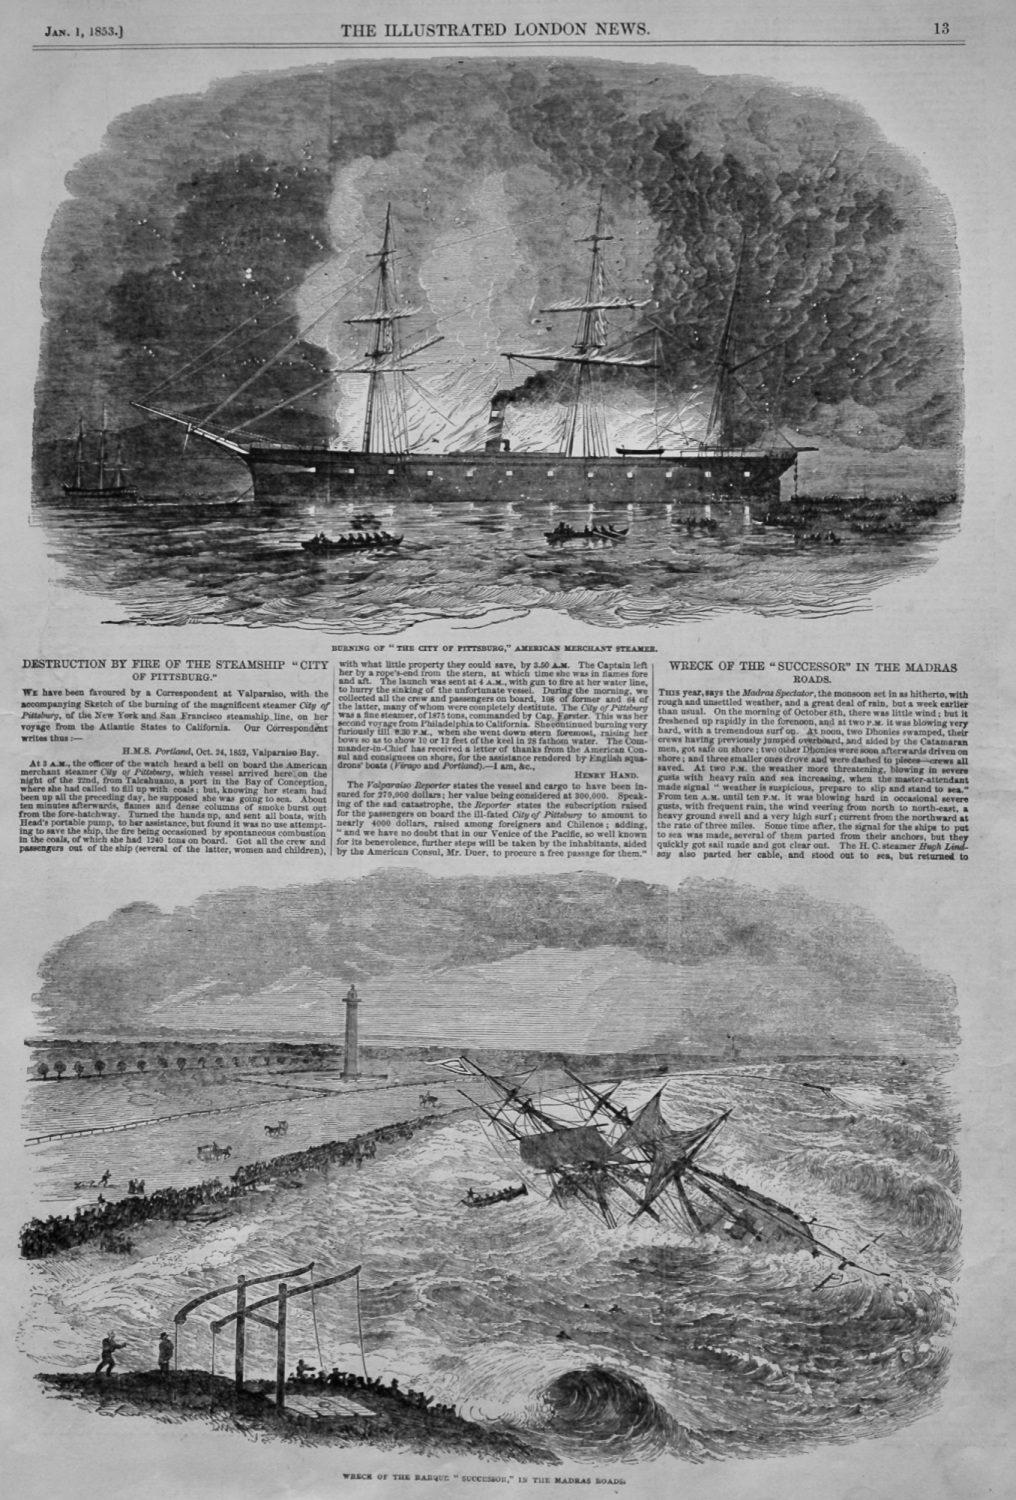 Destruction by Fire of the Steamship 